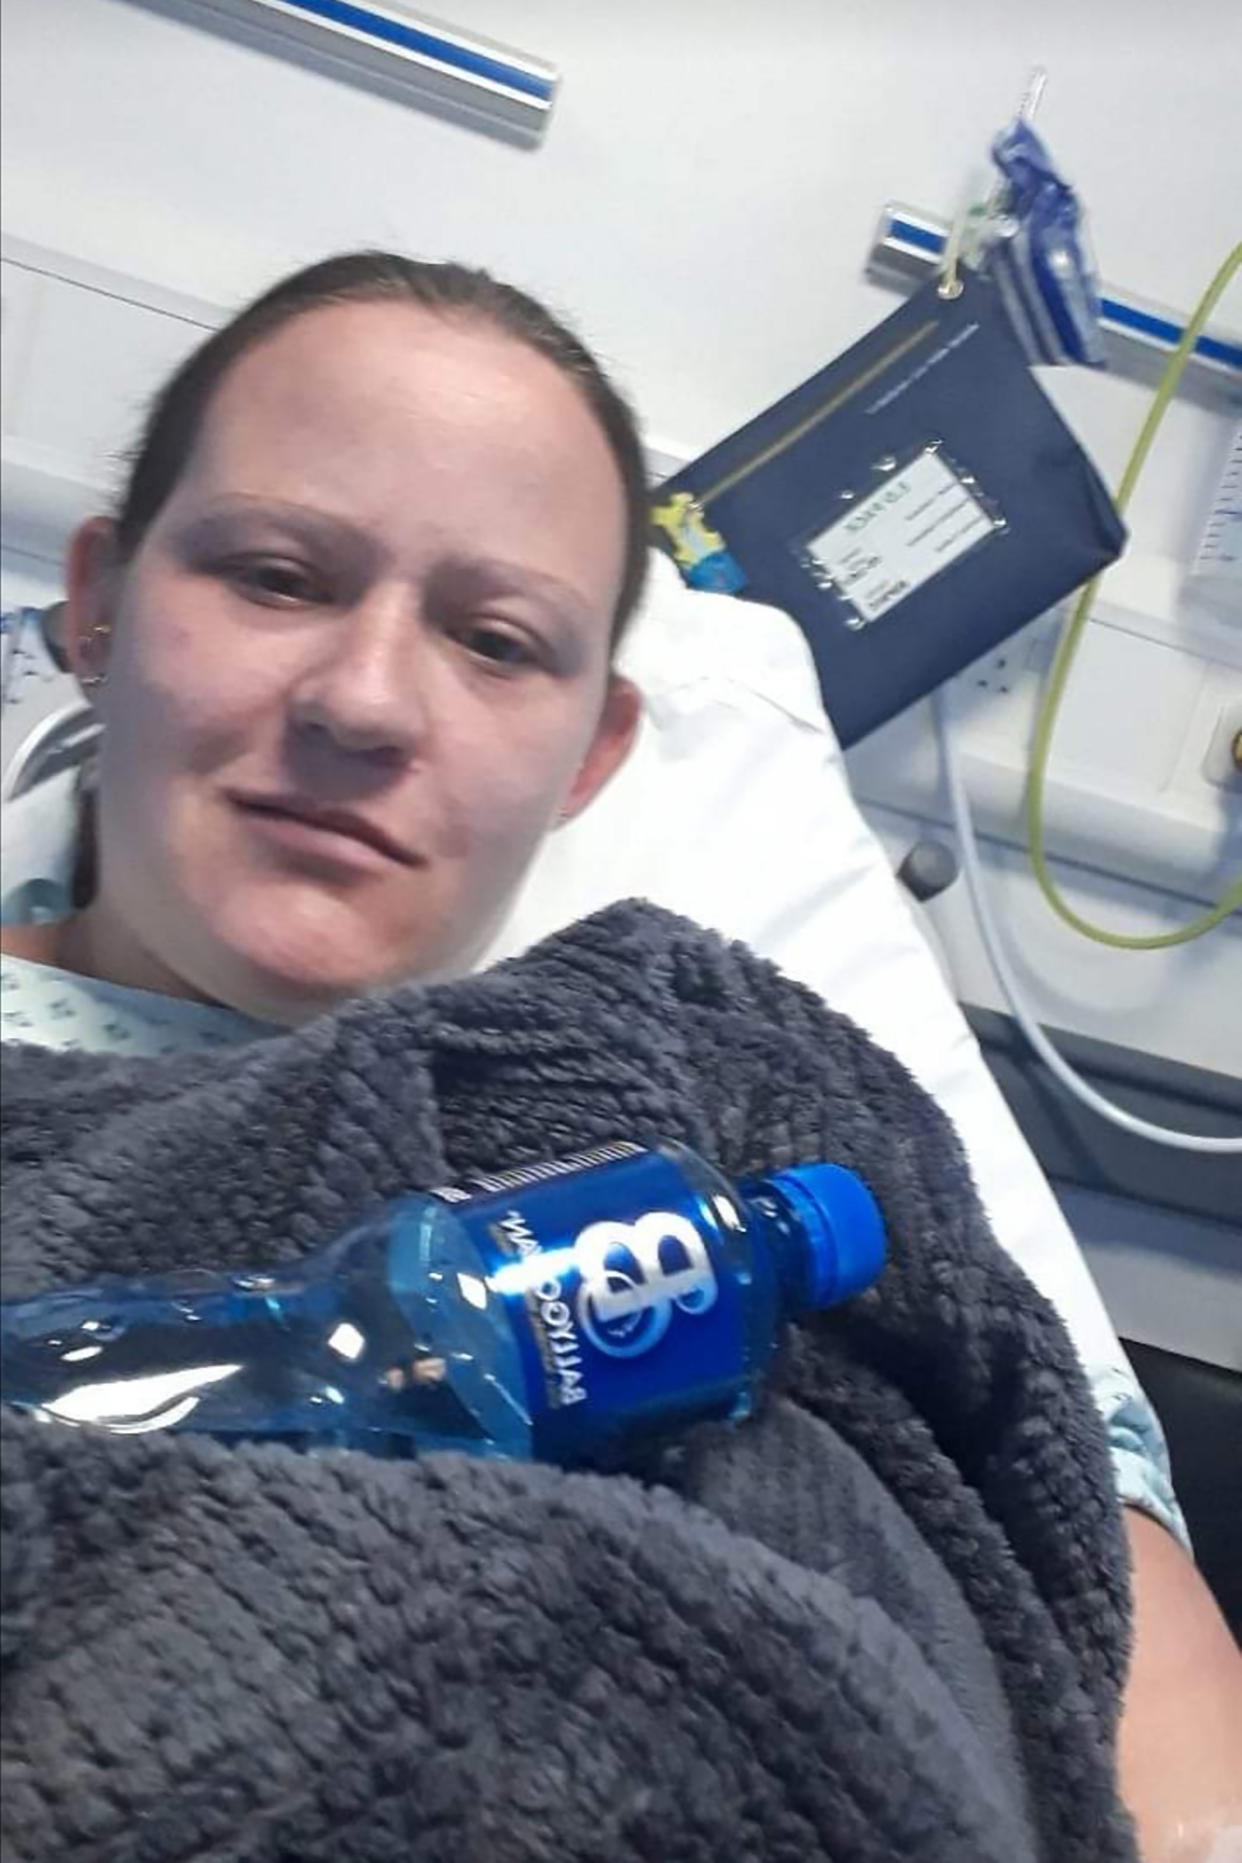 A mum-of-two with a rare allergy was left fighting for her life after she was accidentally served diet cola instead of a full-fat version. [Photo: Caters]